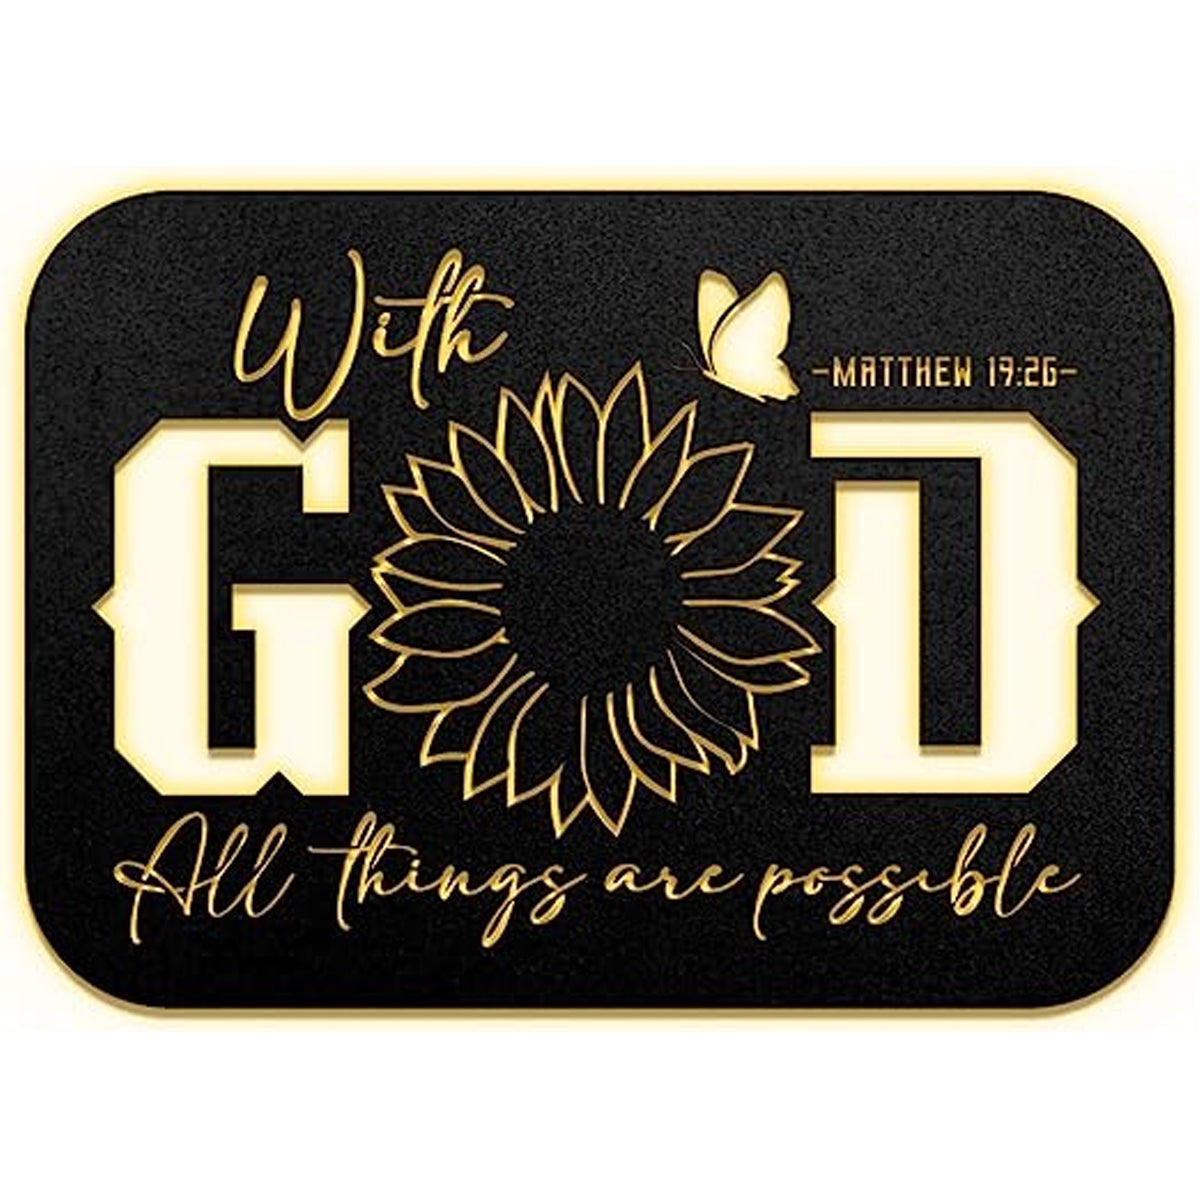 Christianartbag Metal Signs, With God All Things Are Possible Matthew 19:26, Christian Wall Art With Religious Scripture, Appreciation Gifts For Family - Christian Art Bag